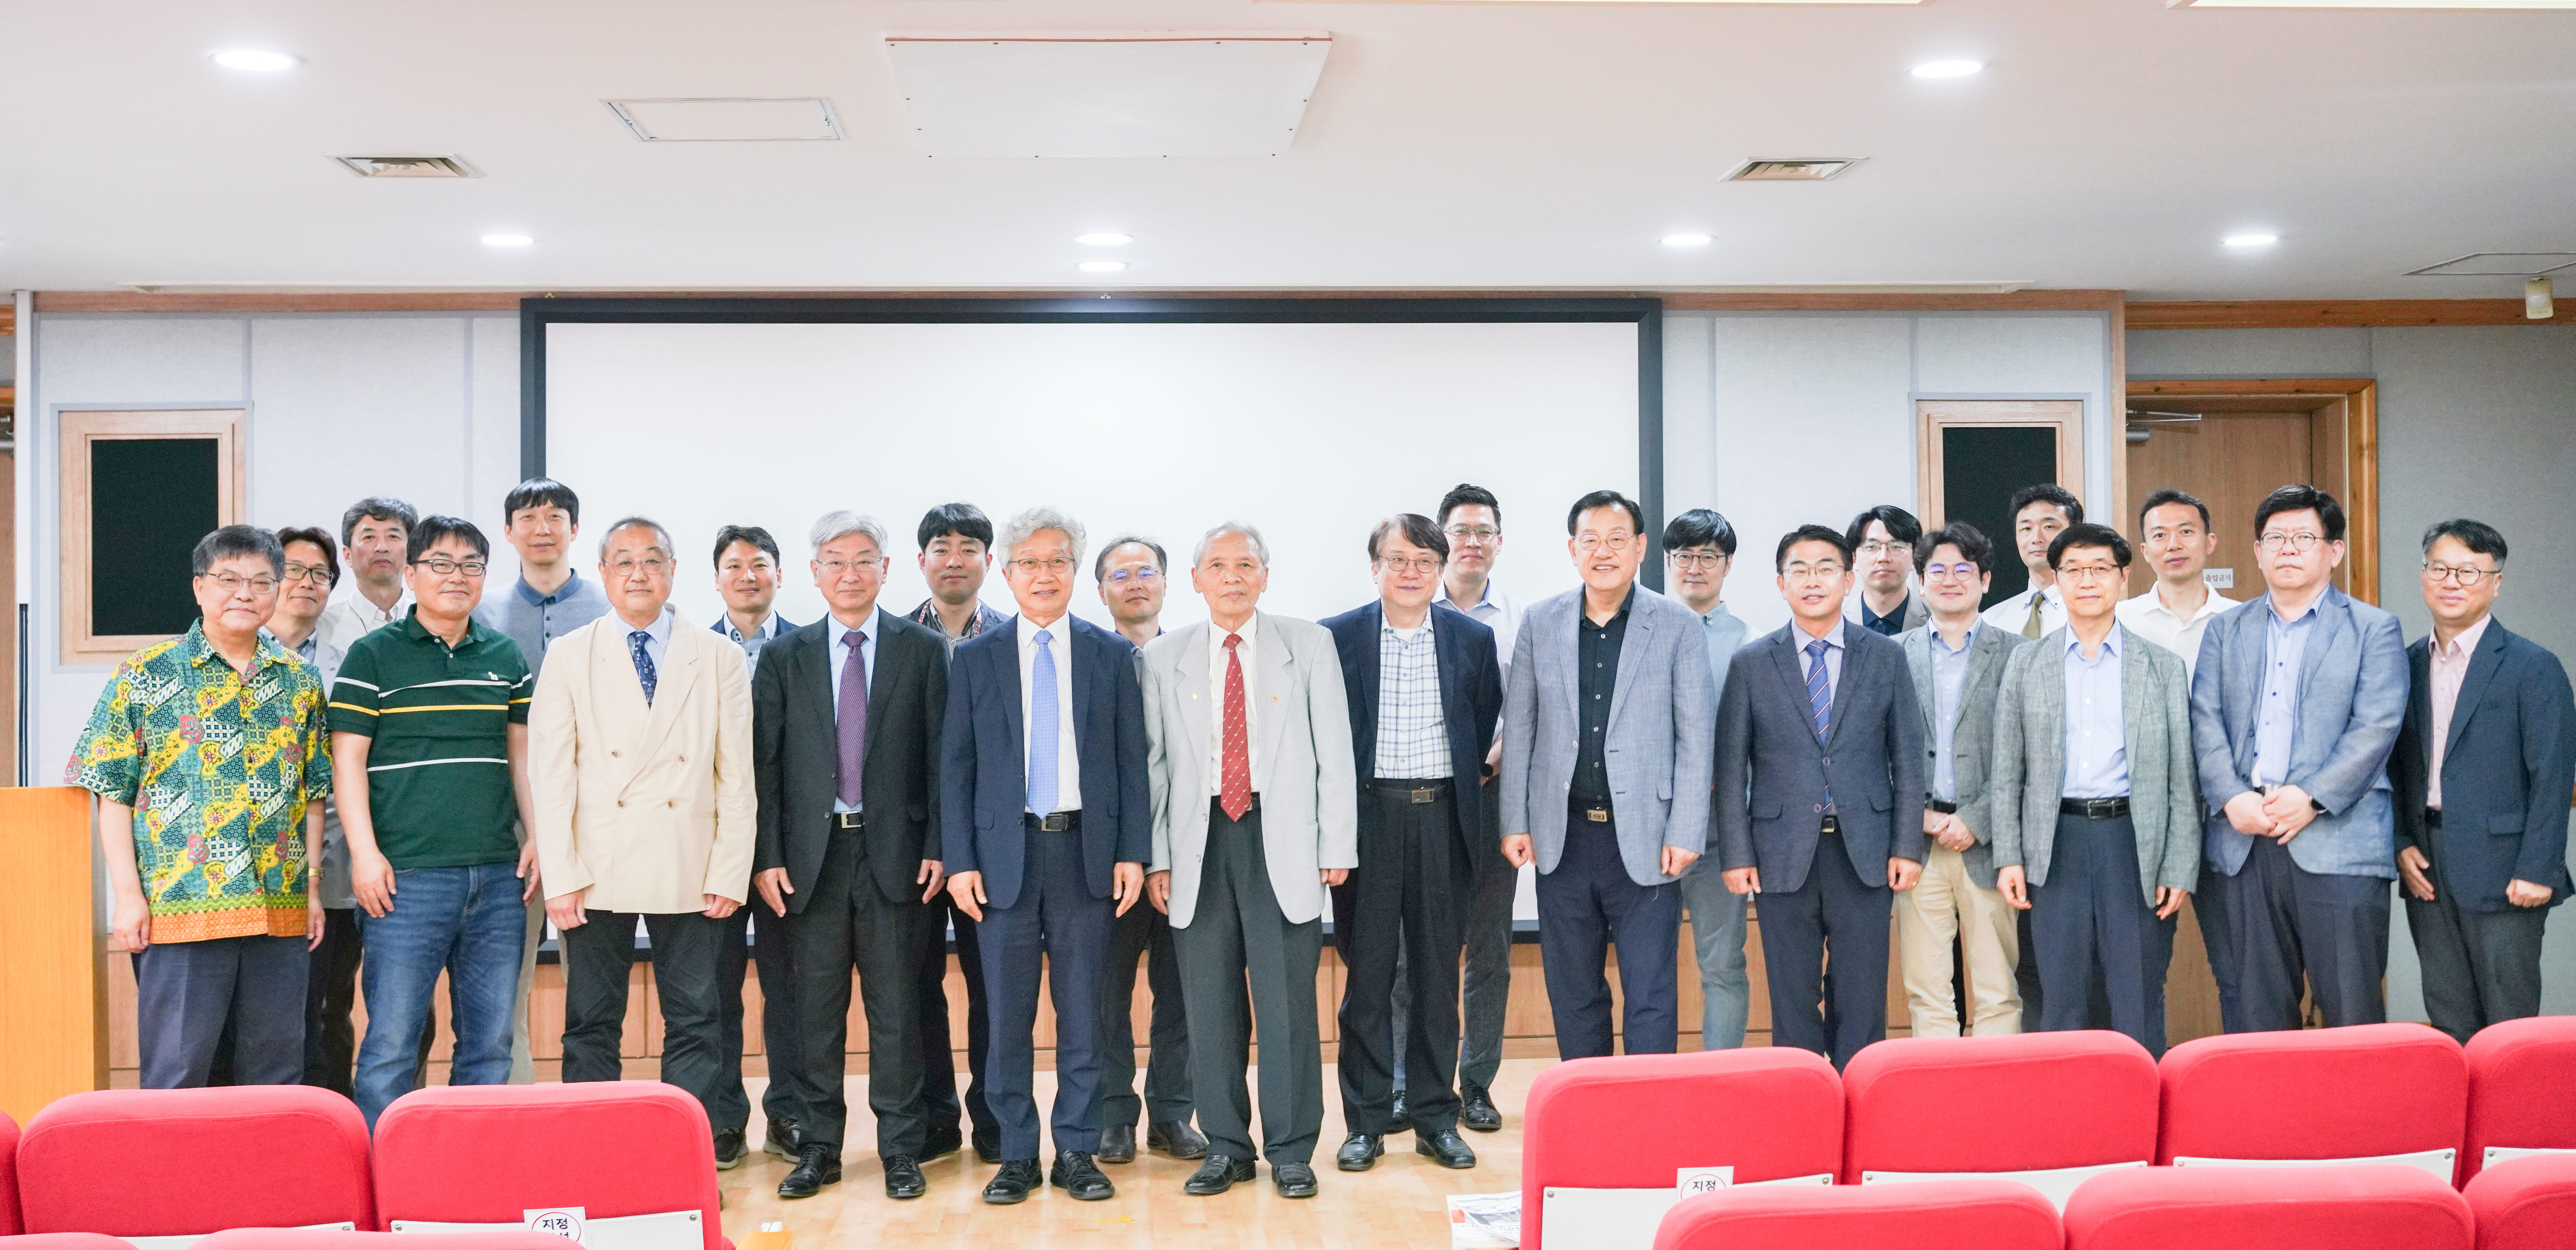 The 30th Anniversary of the Founding of the Department of Polymer-Nano Science & Technology and the Celebration Symposium for Professor Myong-Hoon Lee's retirement 대표이미지